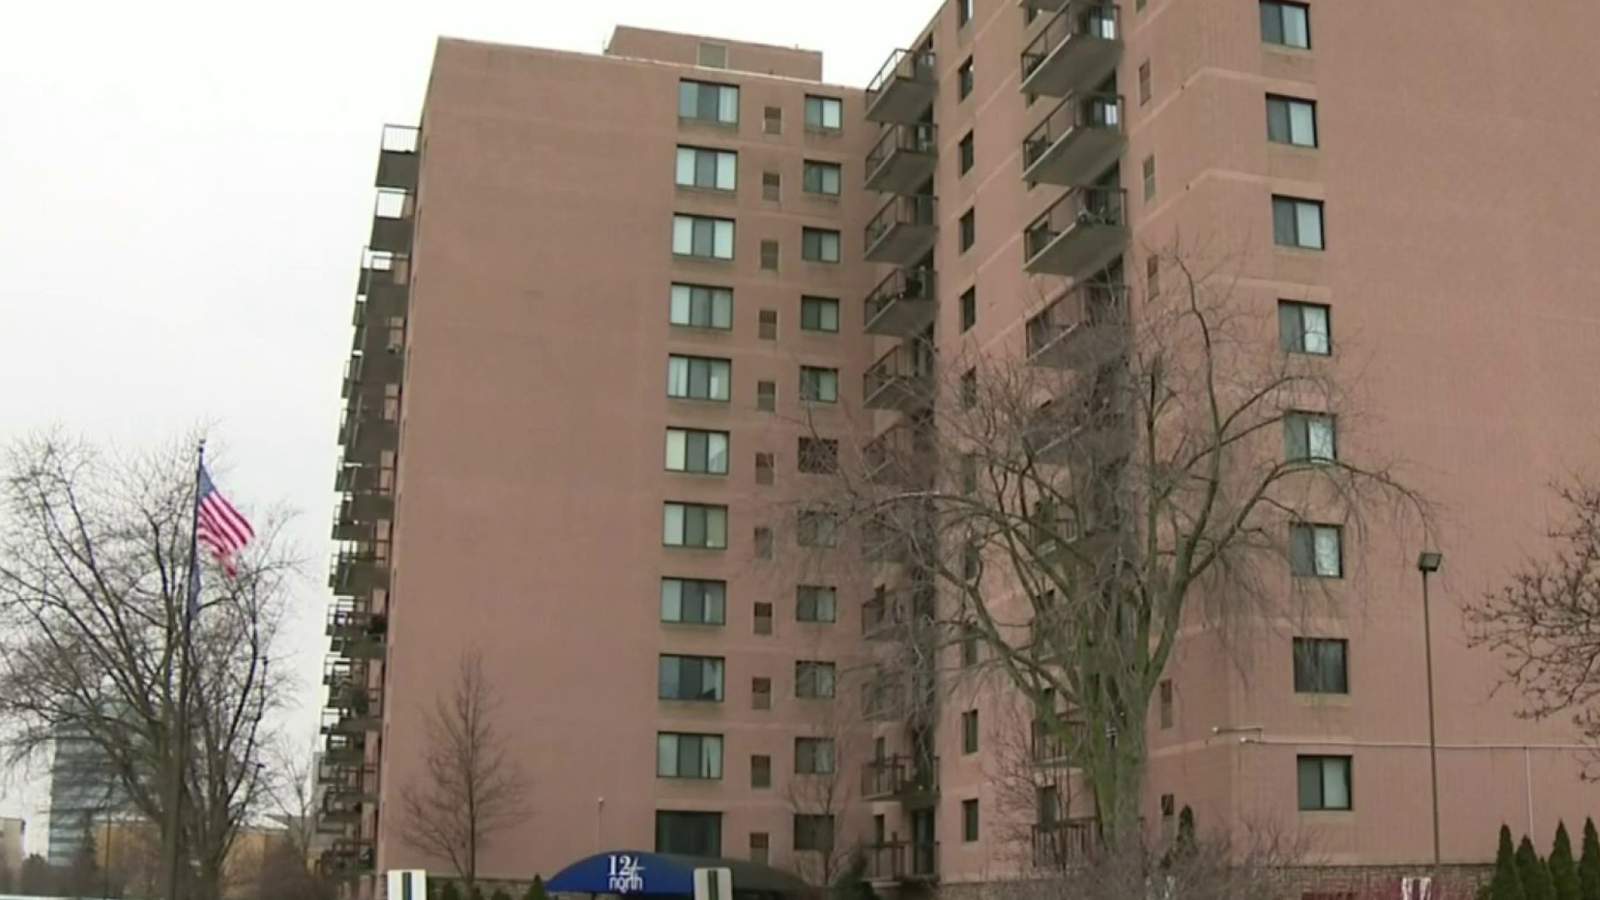 Source: 8-year-old girl shot at Southfield apartment has died